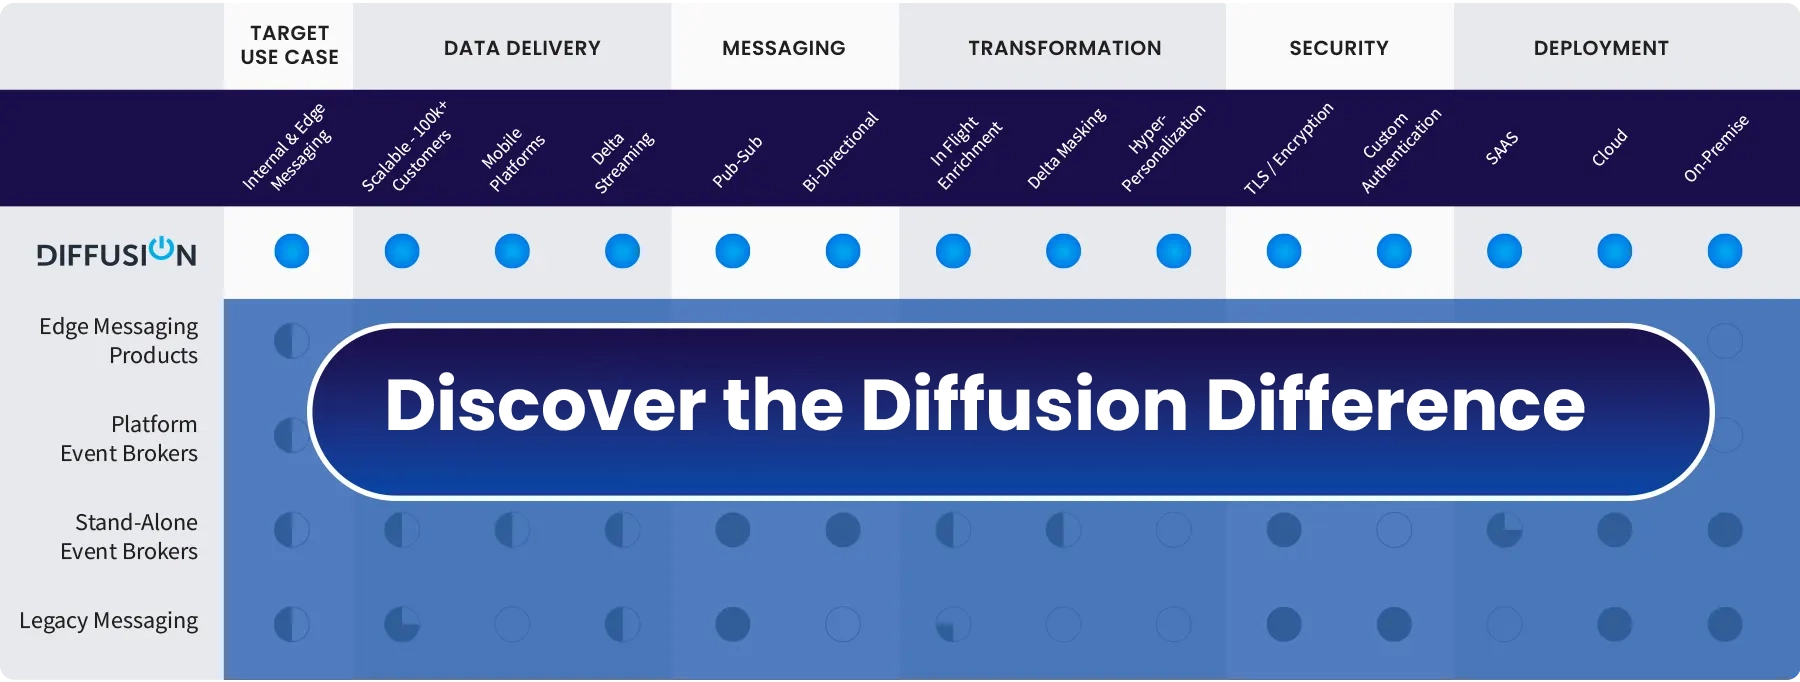 Diffusion delivers table